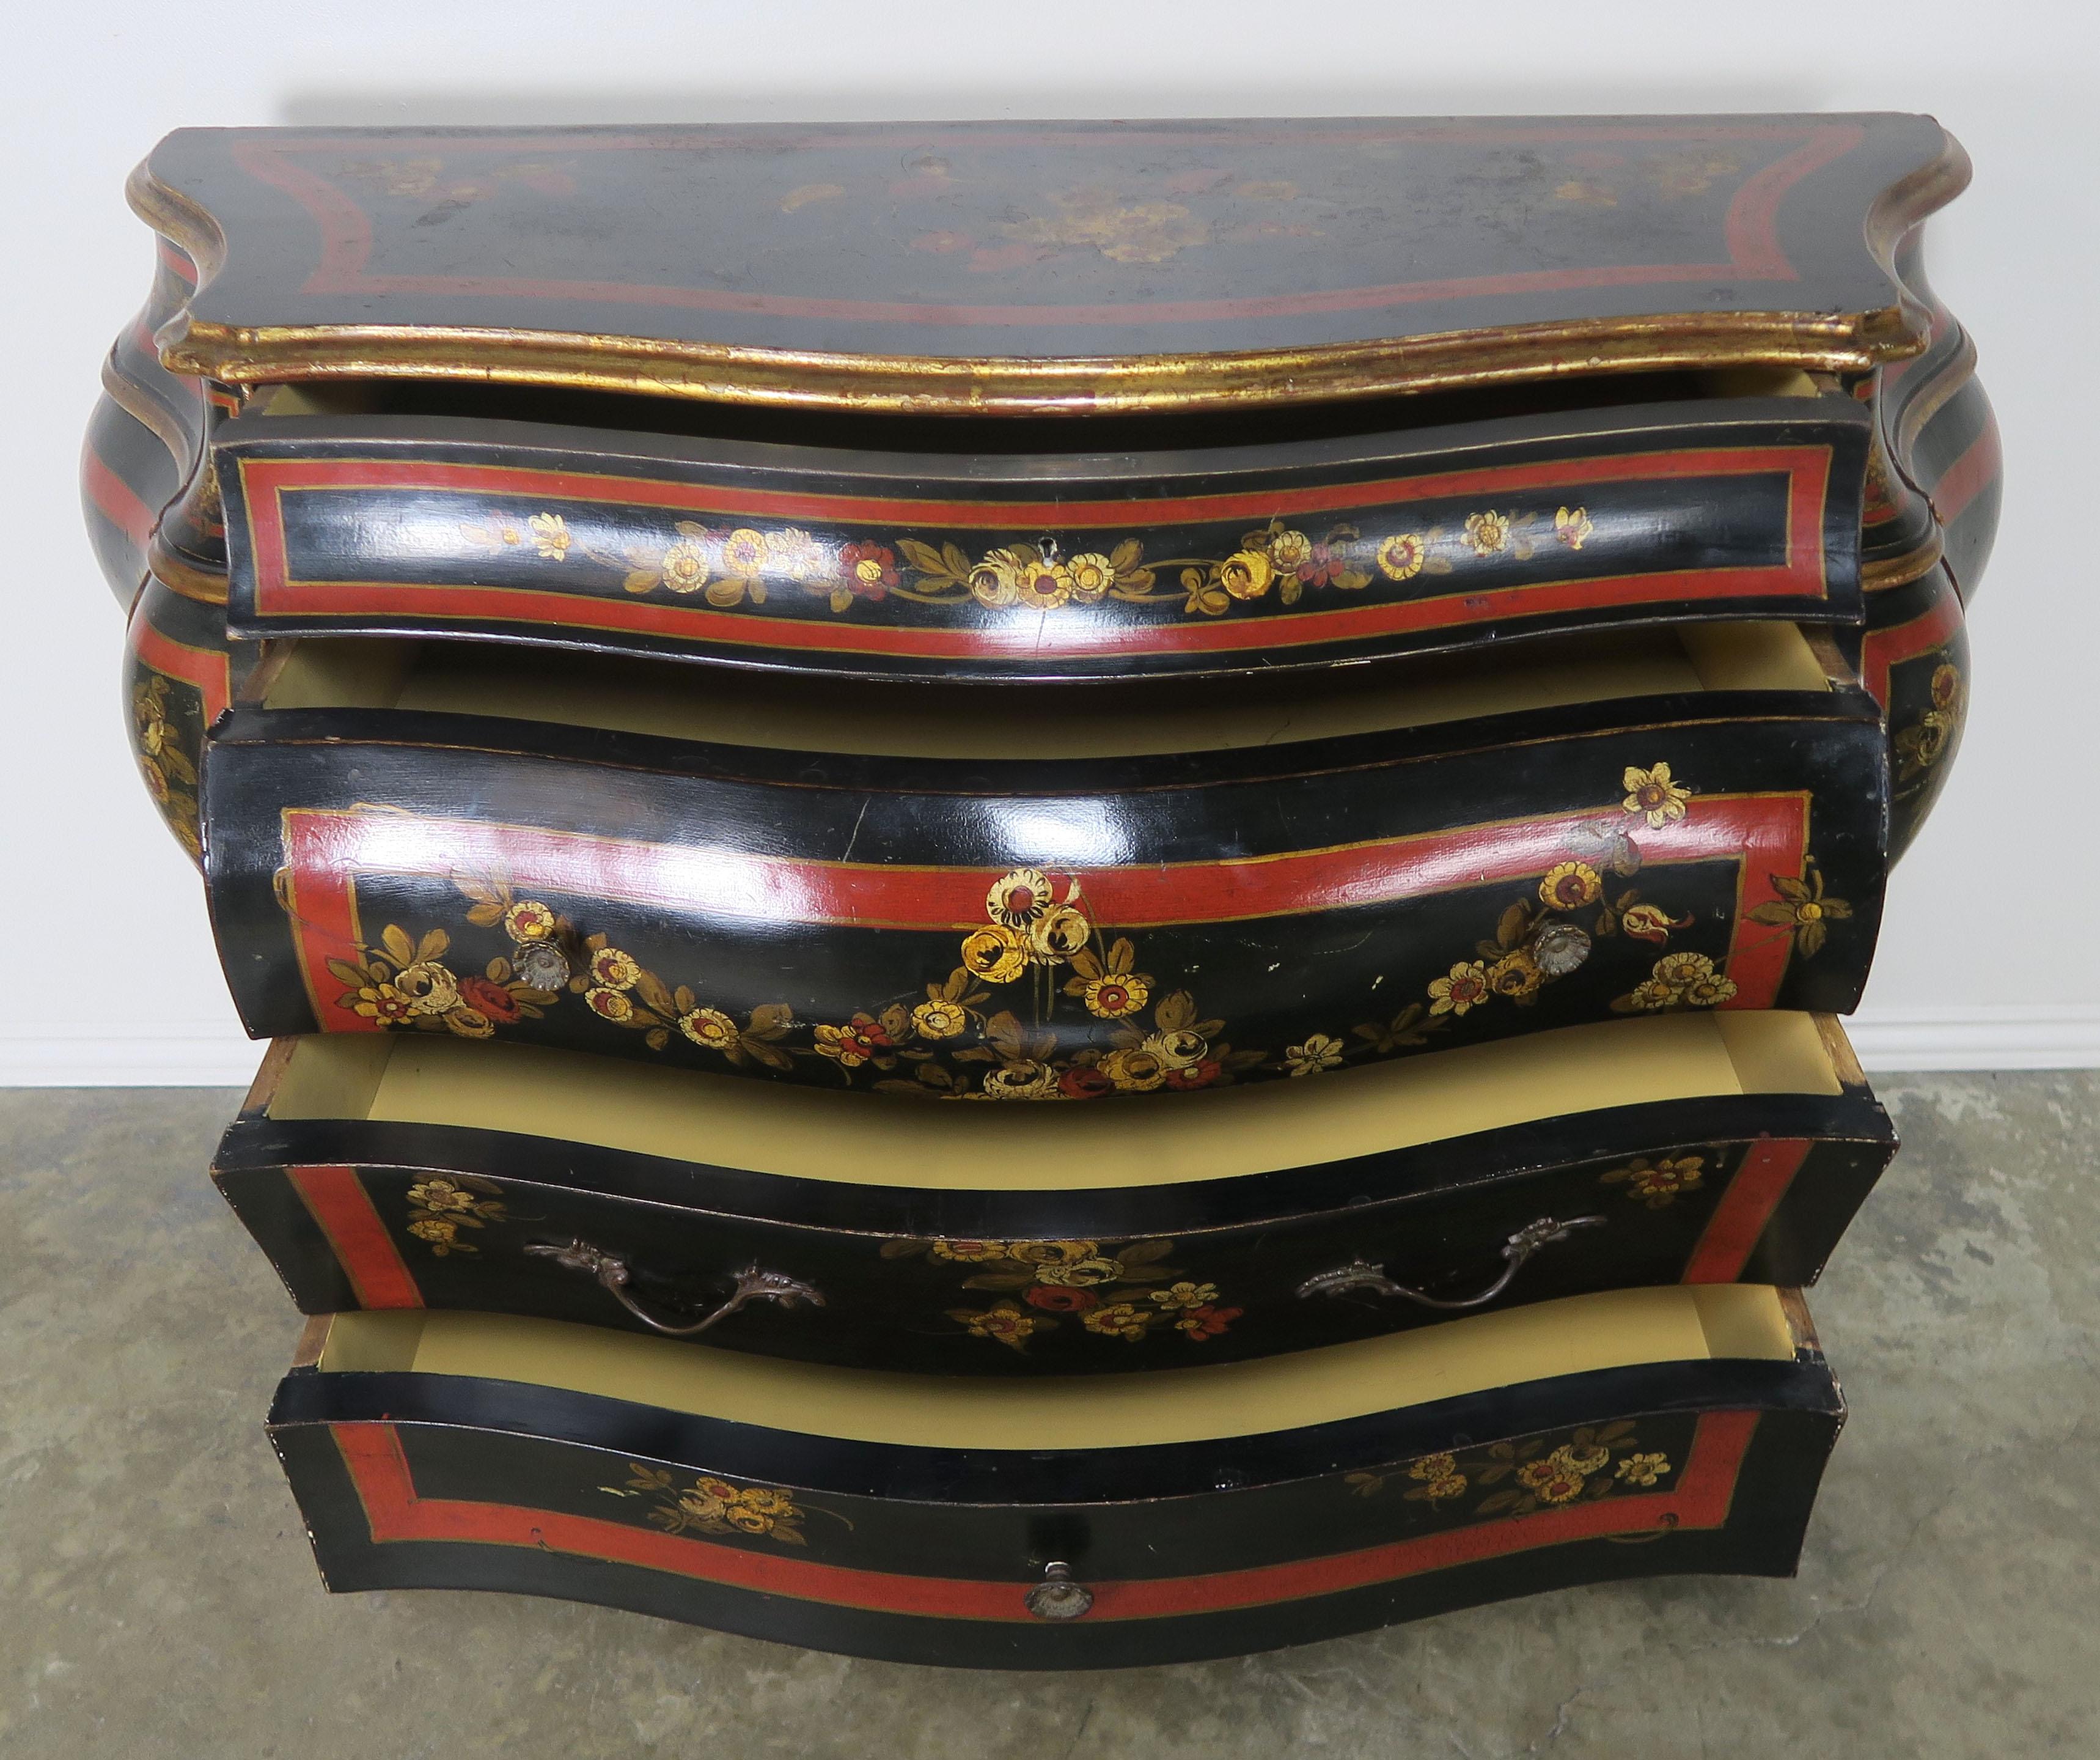 French chinoiserie painted and black lacquered Bombay chest of drawers. The piece is painted in black lacquer with red and gold accent details throughout. There are three large drawers and two smaller drawers on the top for ample storage. The chest